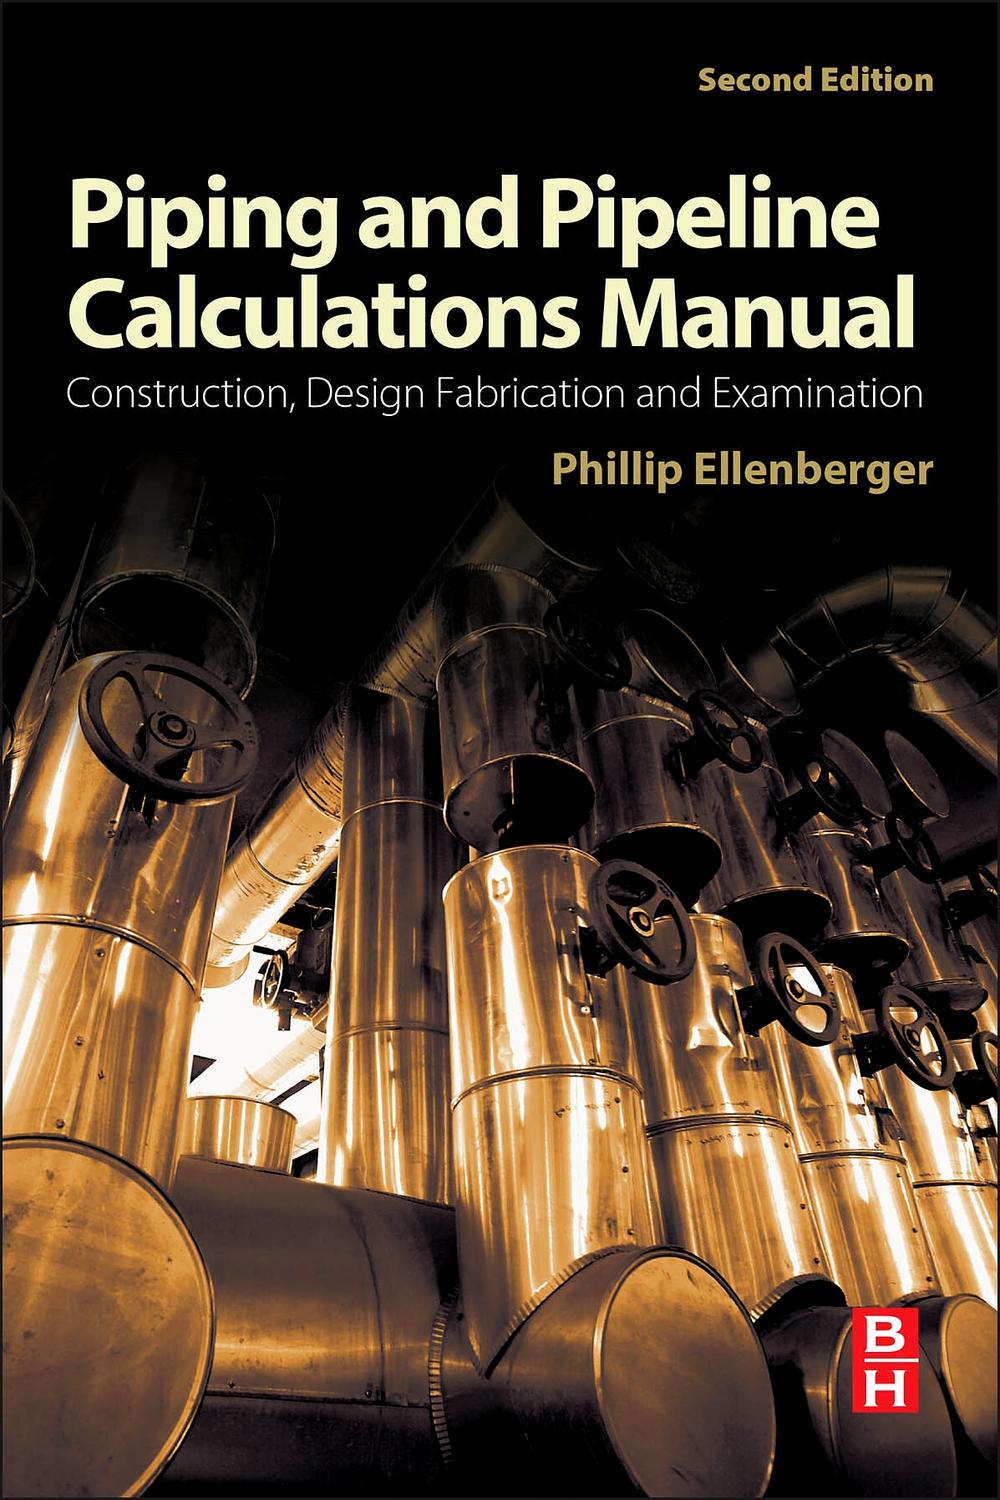 Piping and Pipeline Calculations Manual - Philip Ellenberger